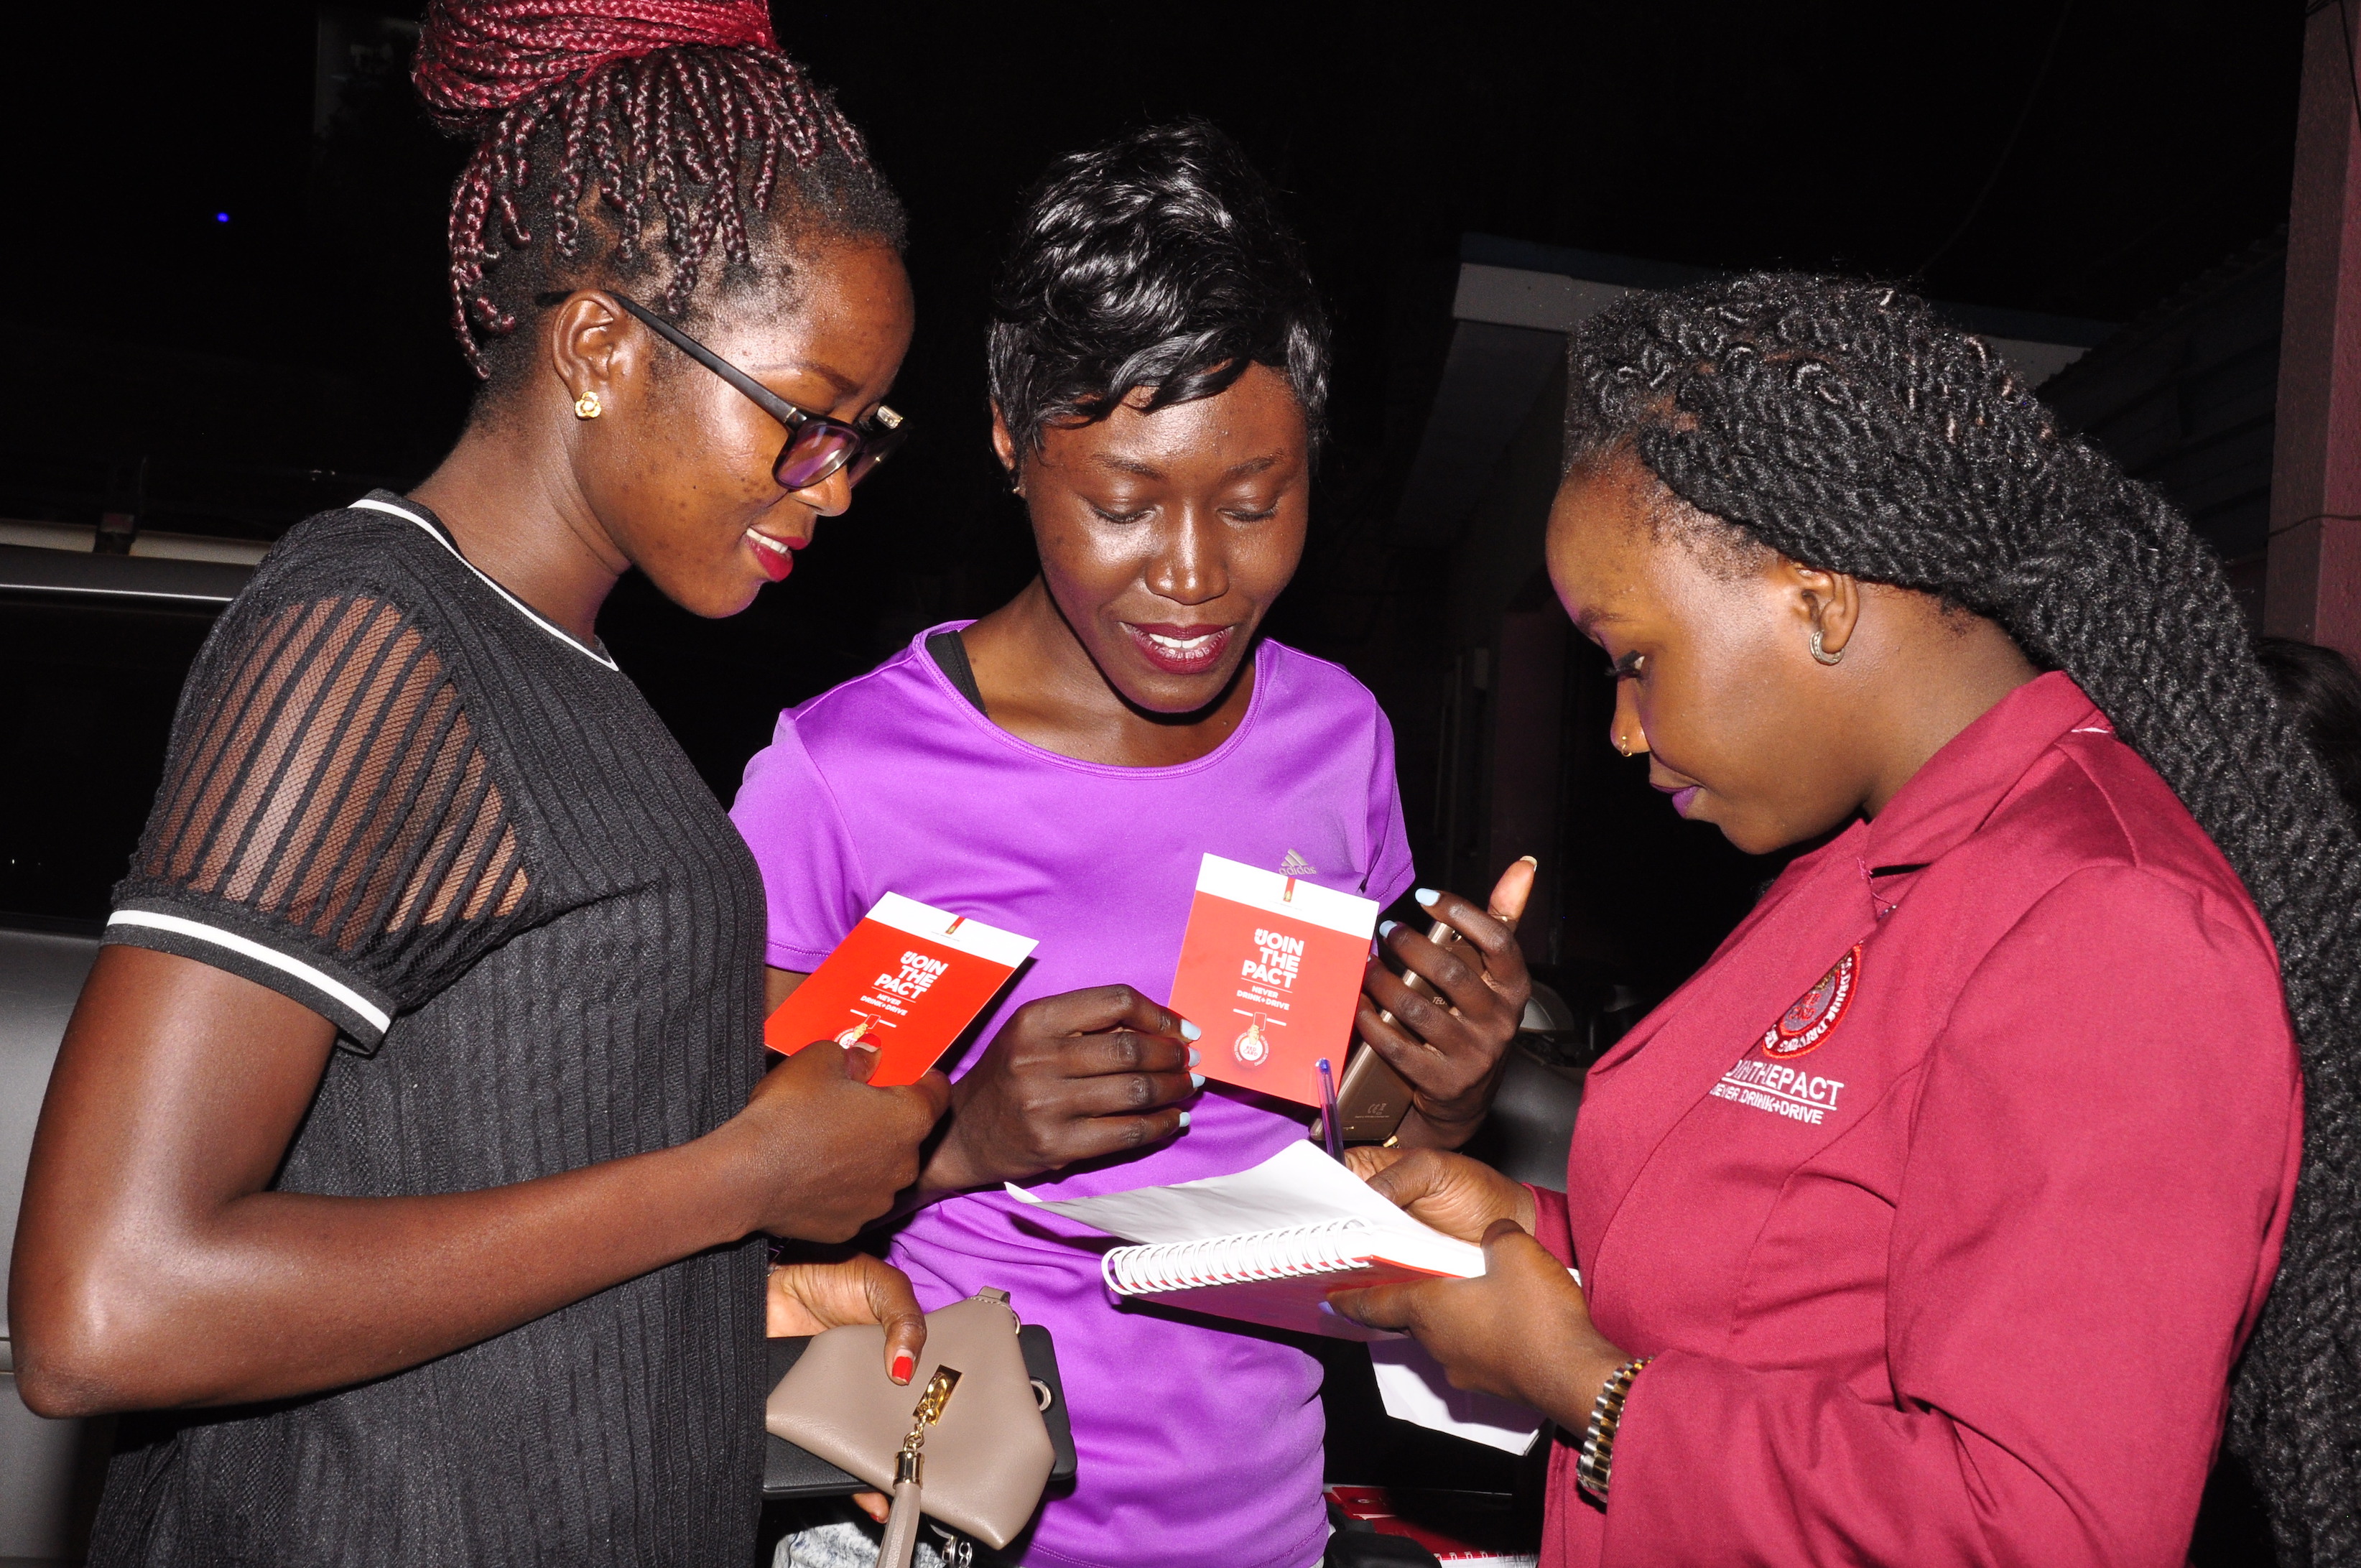 Uganda Breweries Limited (UBL) has embarked on a series of activations in Bars around Kampala as part of their responsible drinking campaign dubbed Red Card.